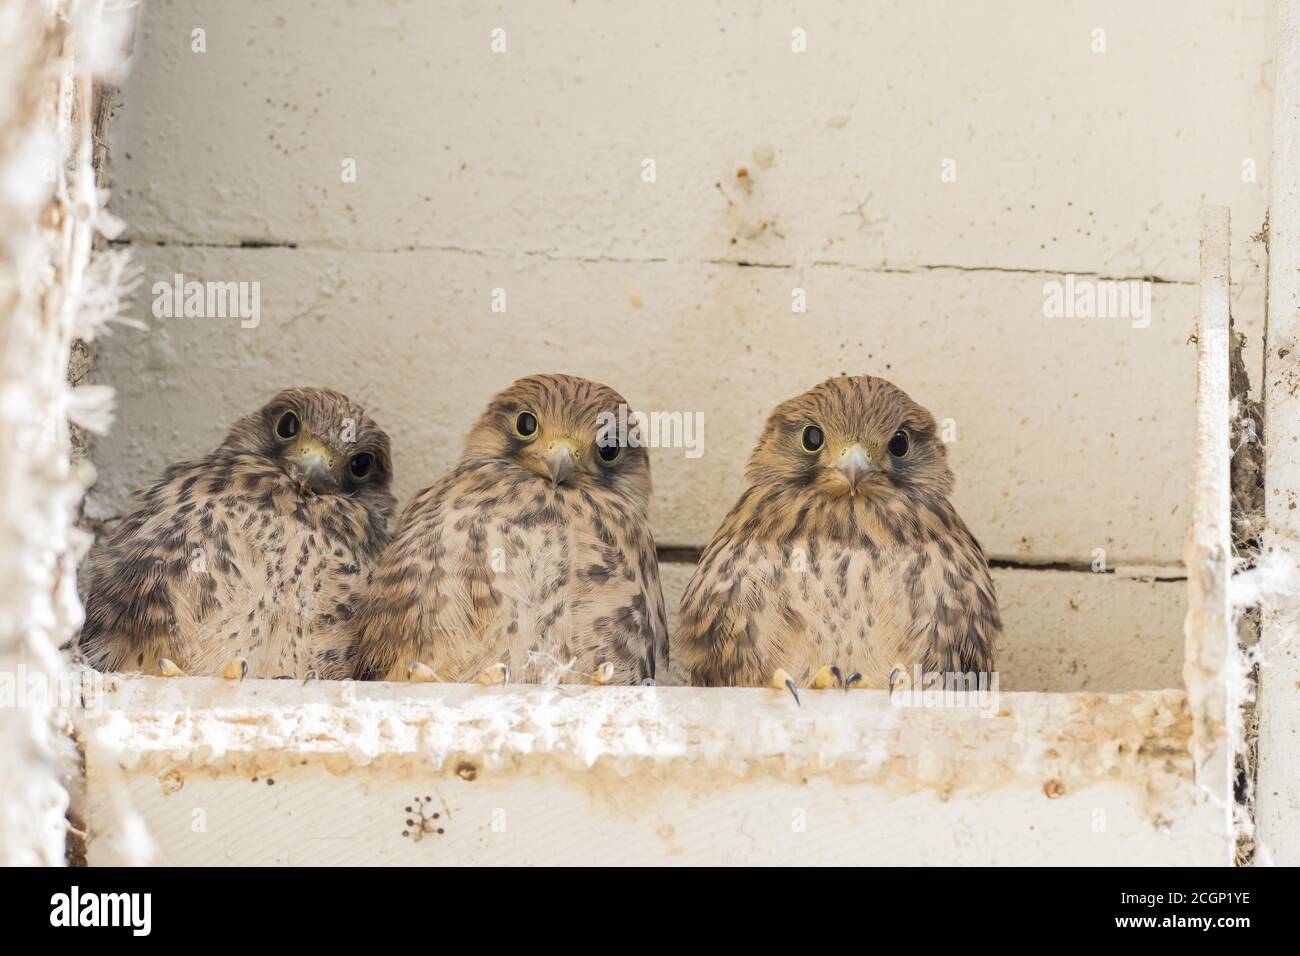 Three Common kestrels (Falco tinnunculus), young birds, sitting in the nesting box, Hesse, Germany Stock Photo